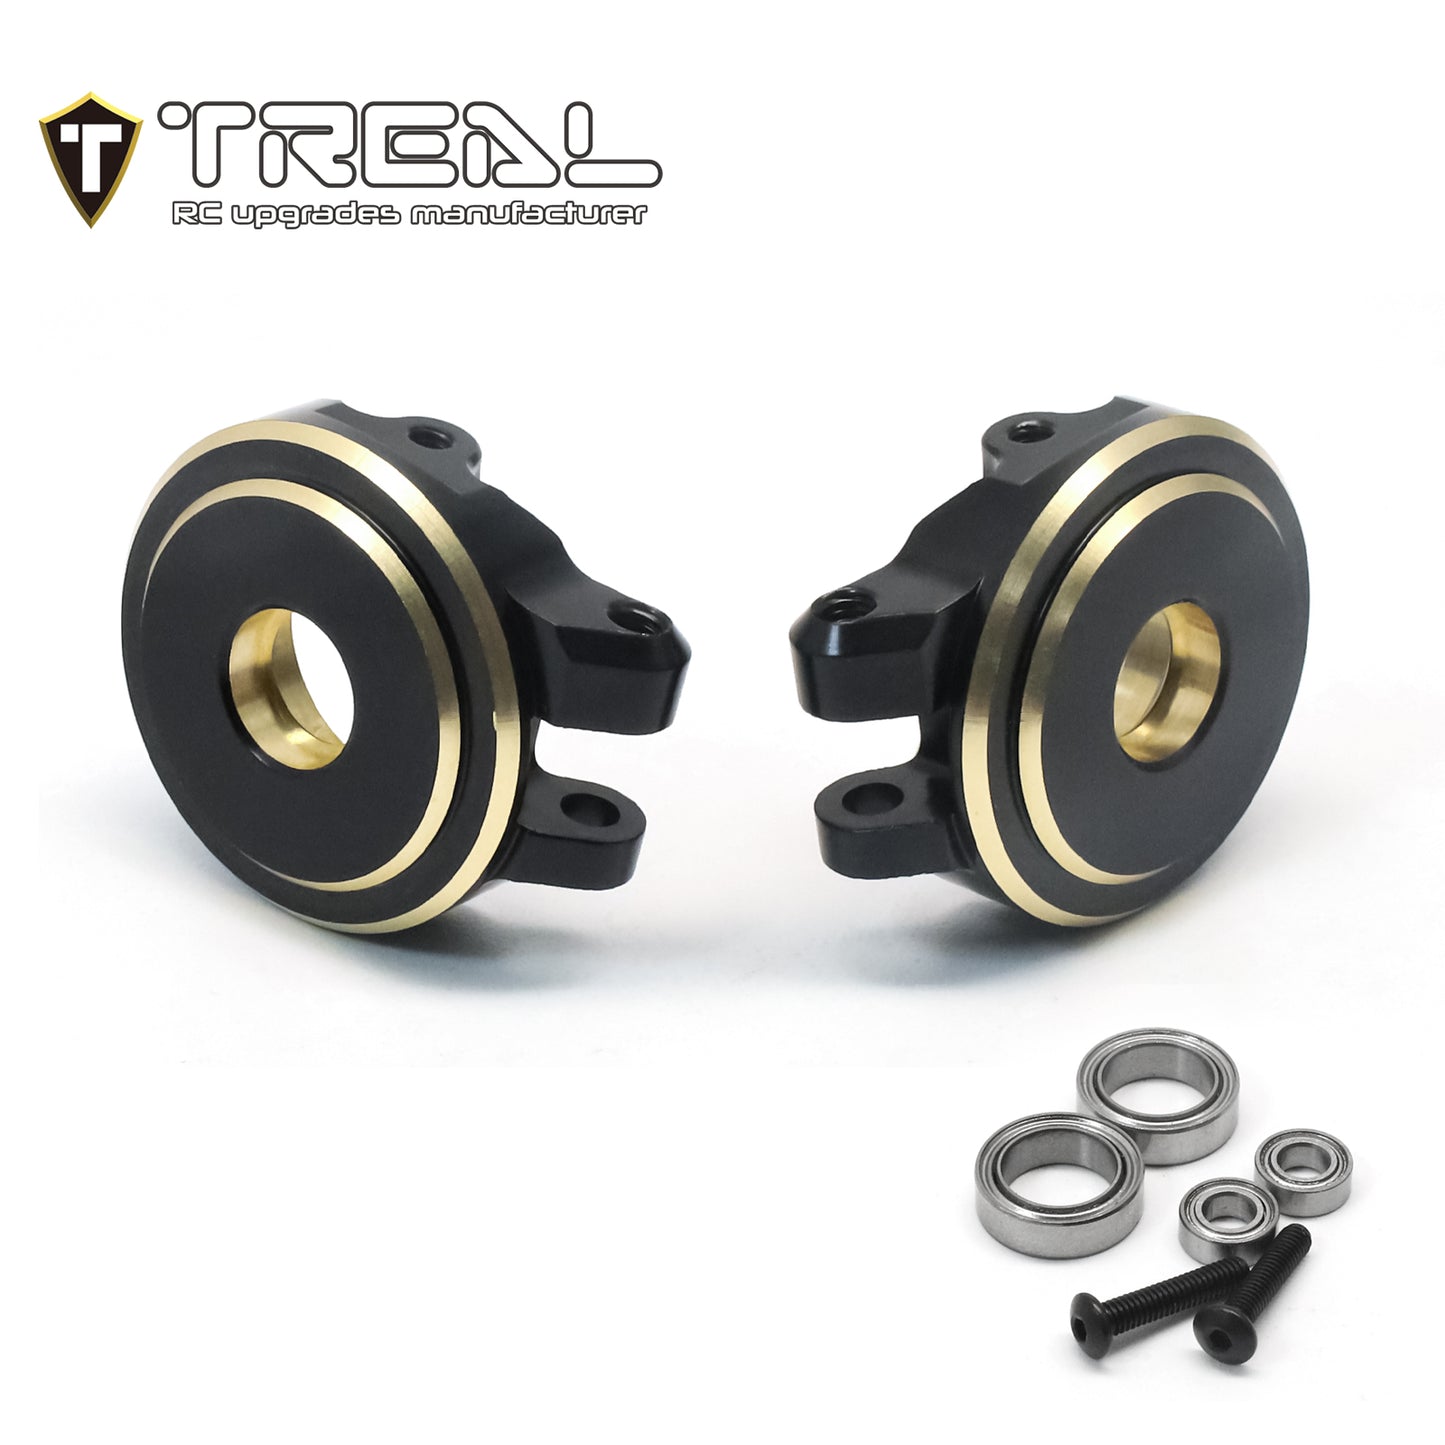 TREAL Brass Front Steering Knuckles Set 18.6g/pc (2P) L&R Heavy Weight Upgrades for 1/18 TRX4M Defender Bronco